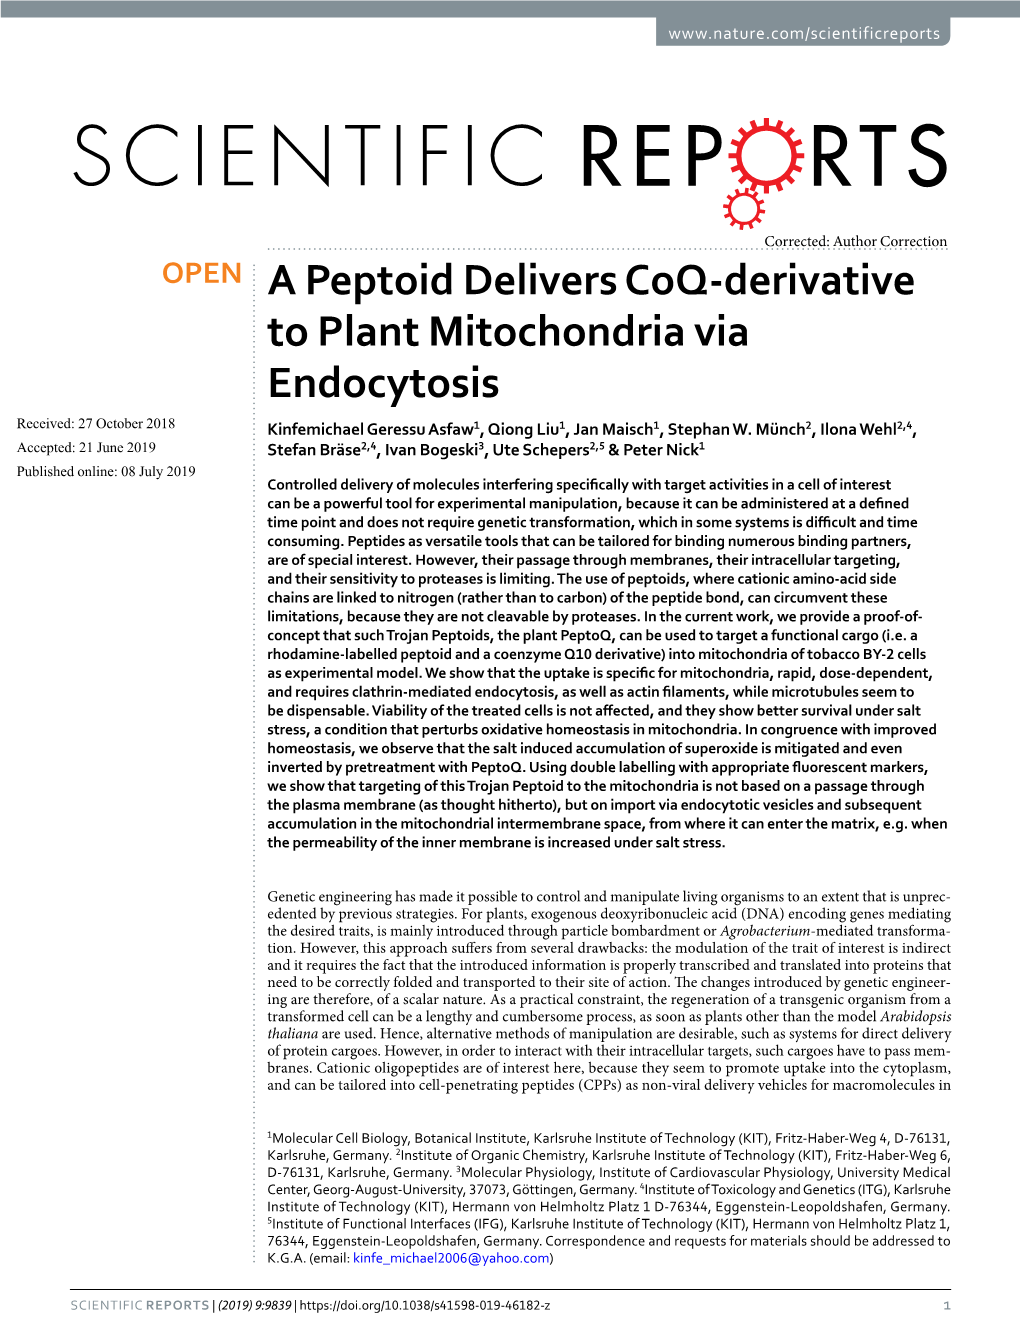 A Peptoid Delivers Coq-Derivative to Plant Mitochondria Via Endocytosis Received: 27 October 2018 Kinfemichael Geressu Asfaw1, Qiong Liu1, Jan Maisch1, Stephan W